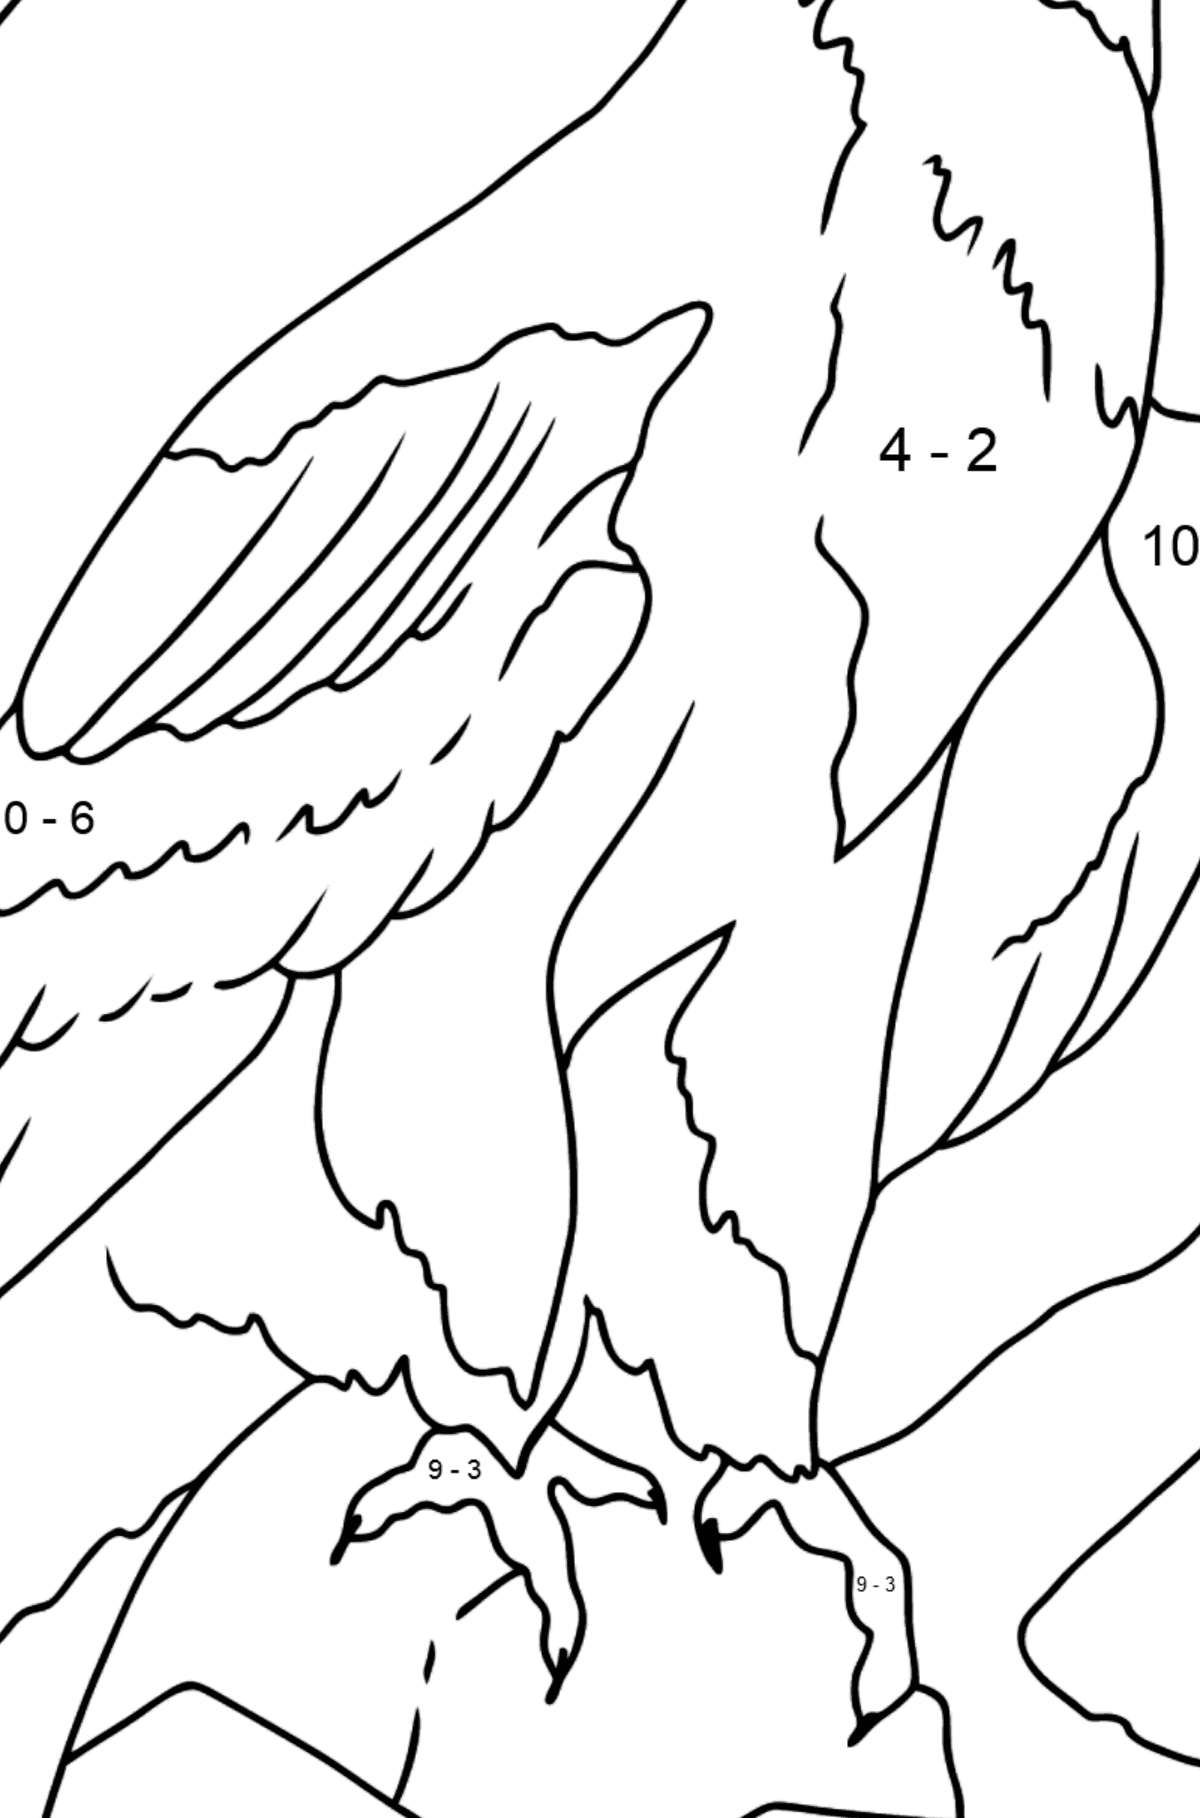 Coloring Page - An Eagle is on the Hunt - Math Coloring - Subtraction for Kids